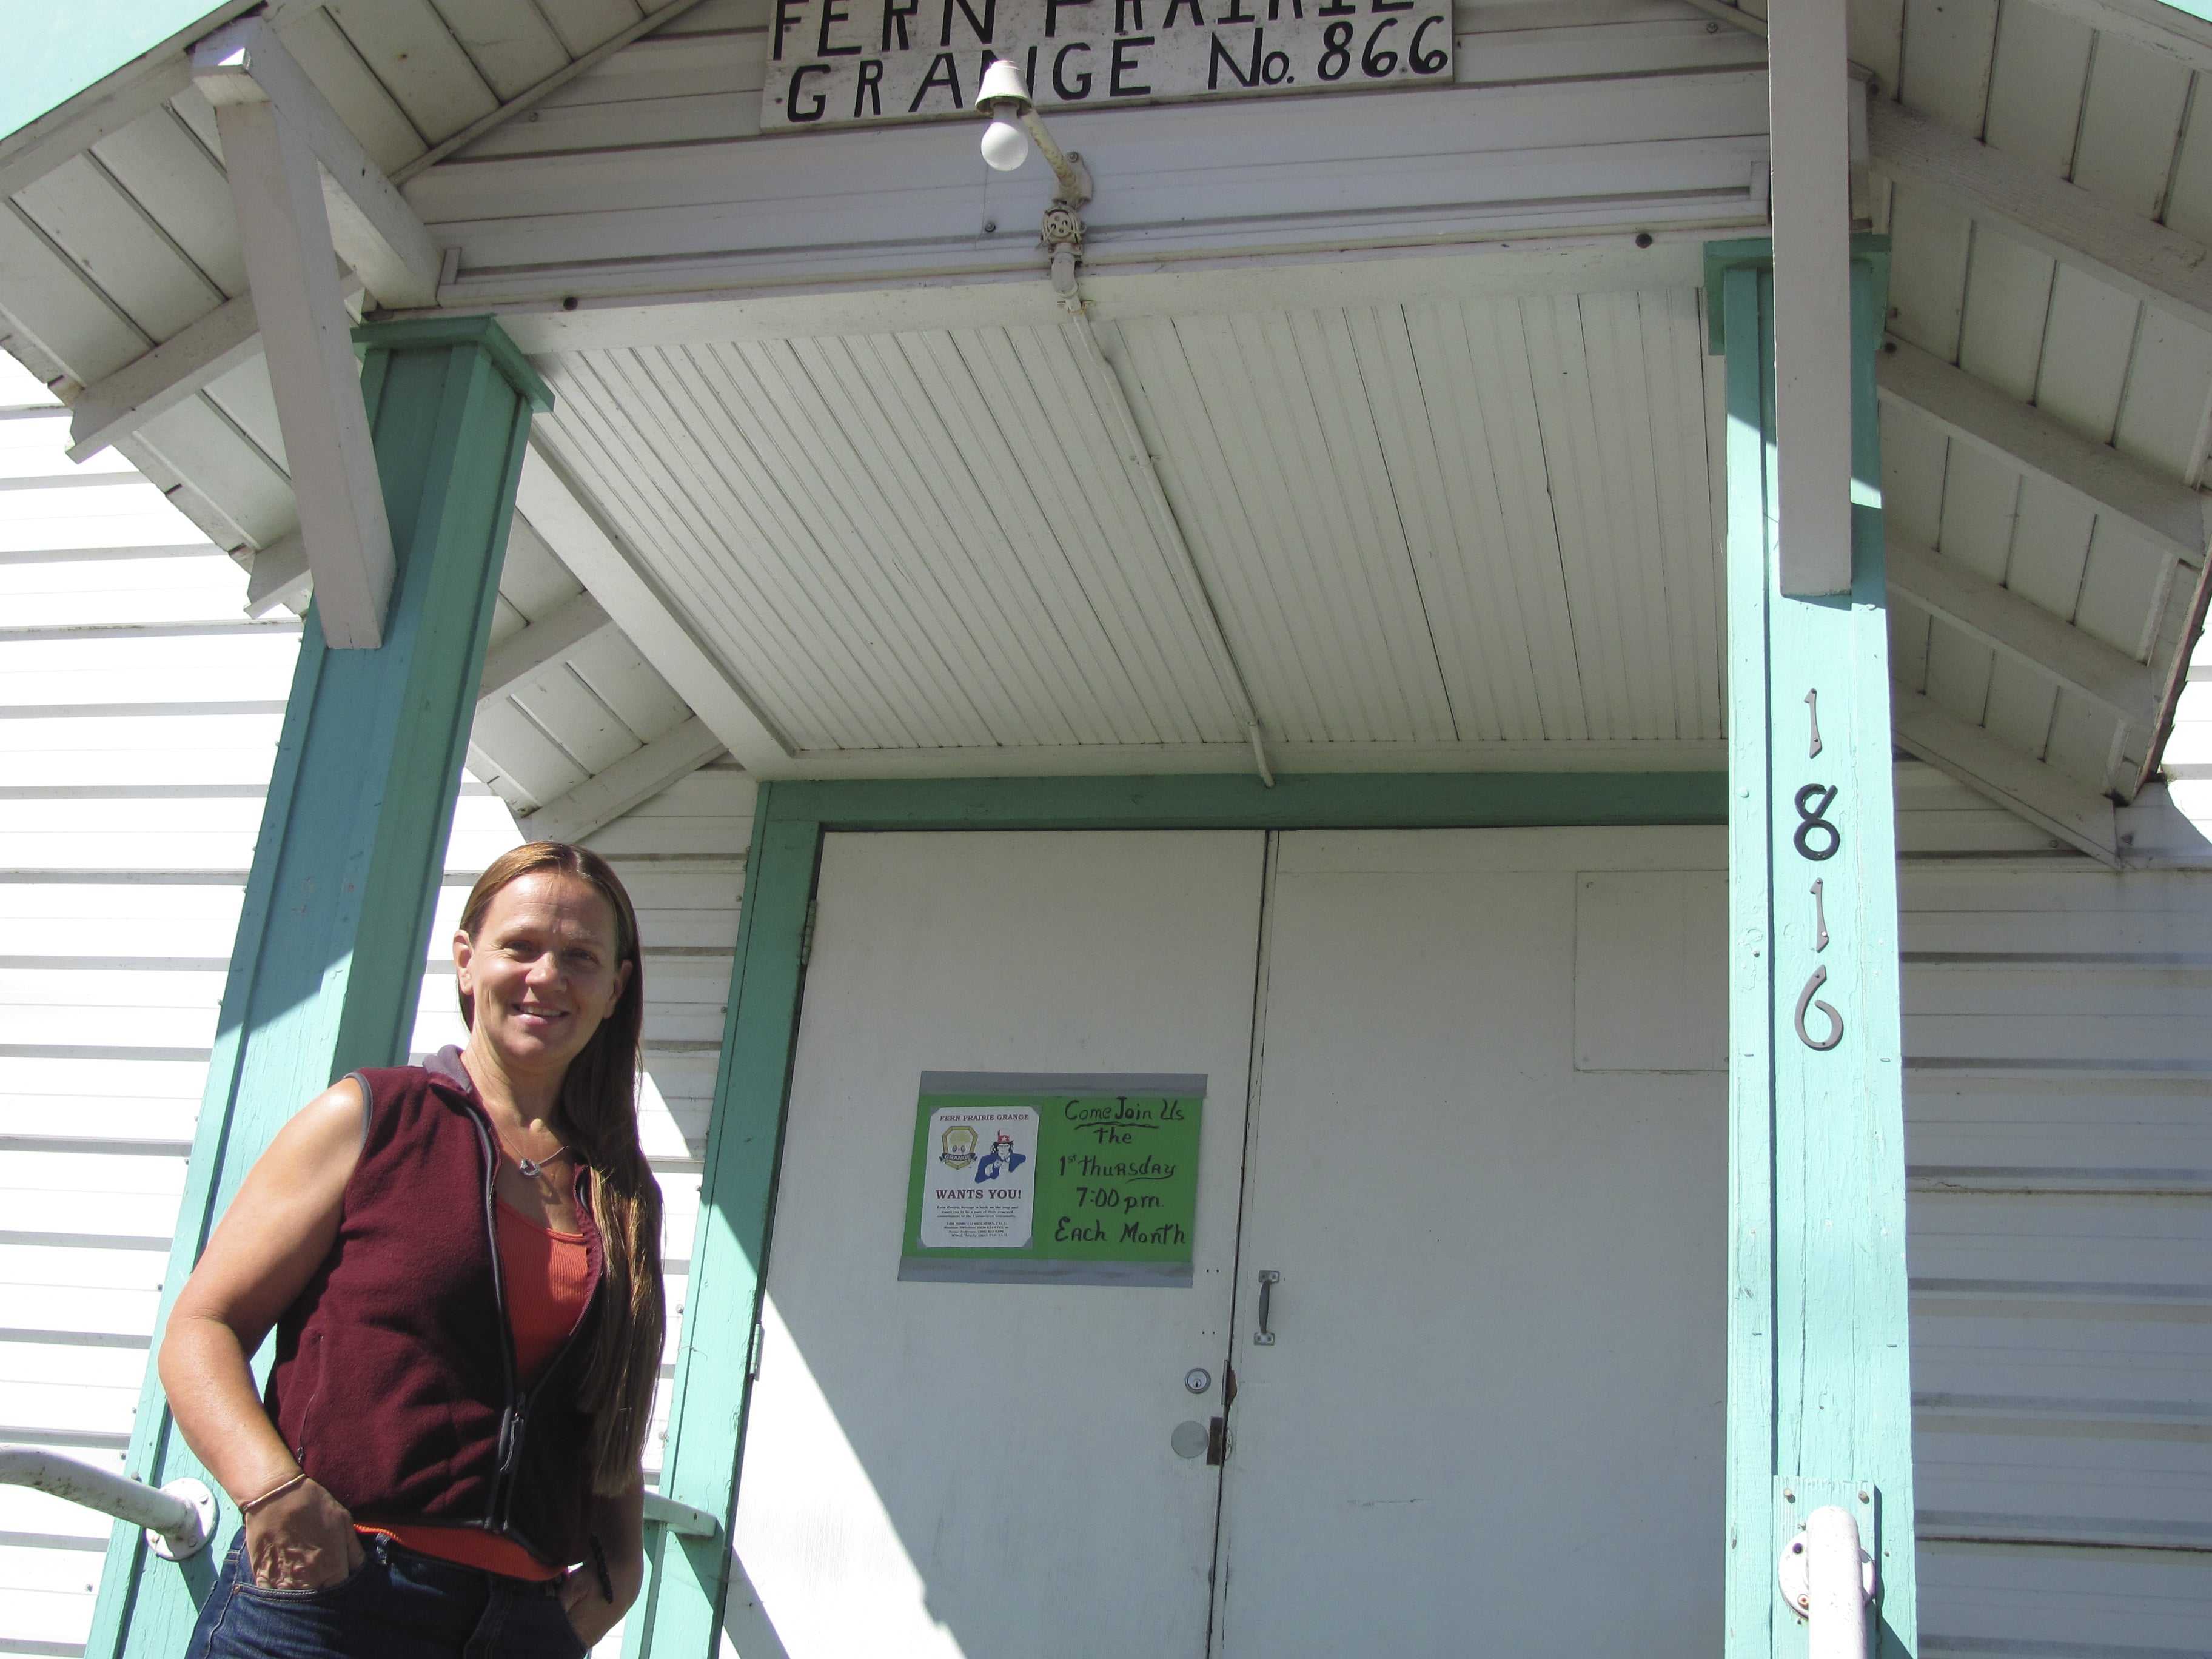 Shannon Nickelsen has dedicated countless hours during the past six months to revitalizing the Fern Prairie Grange. "It's a place for Americans to gather together and unite," she said.